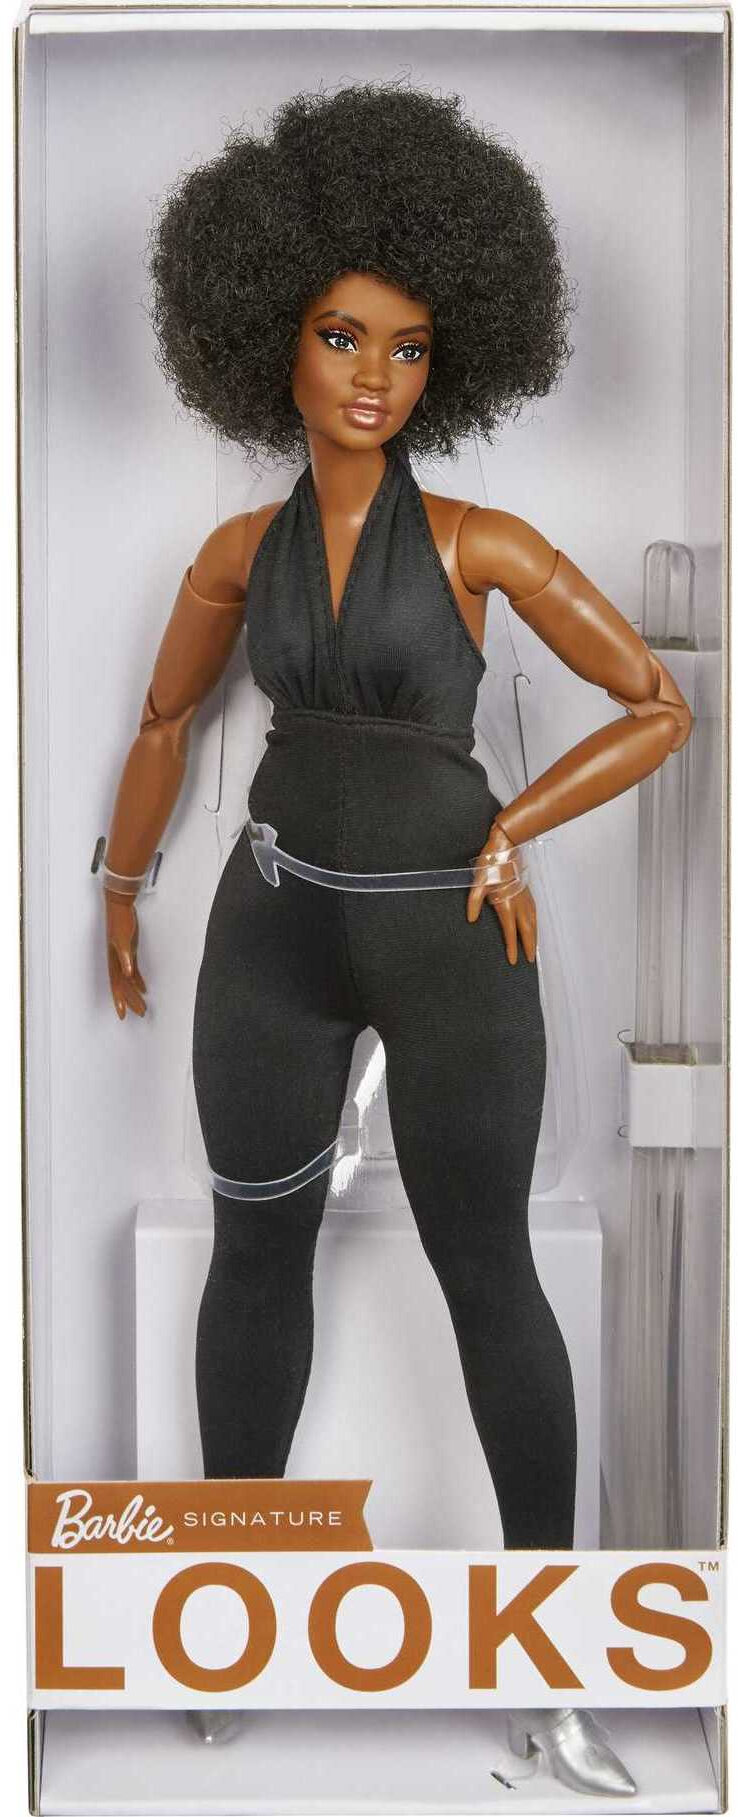 Barbie Looks Collectible Fashion Doll, Posable with Natural Hair & Black Jumpsuit - image 3 of 5